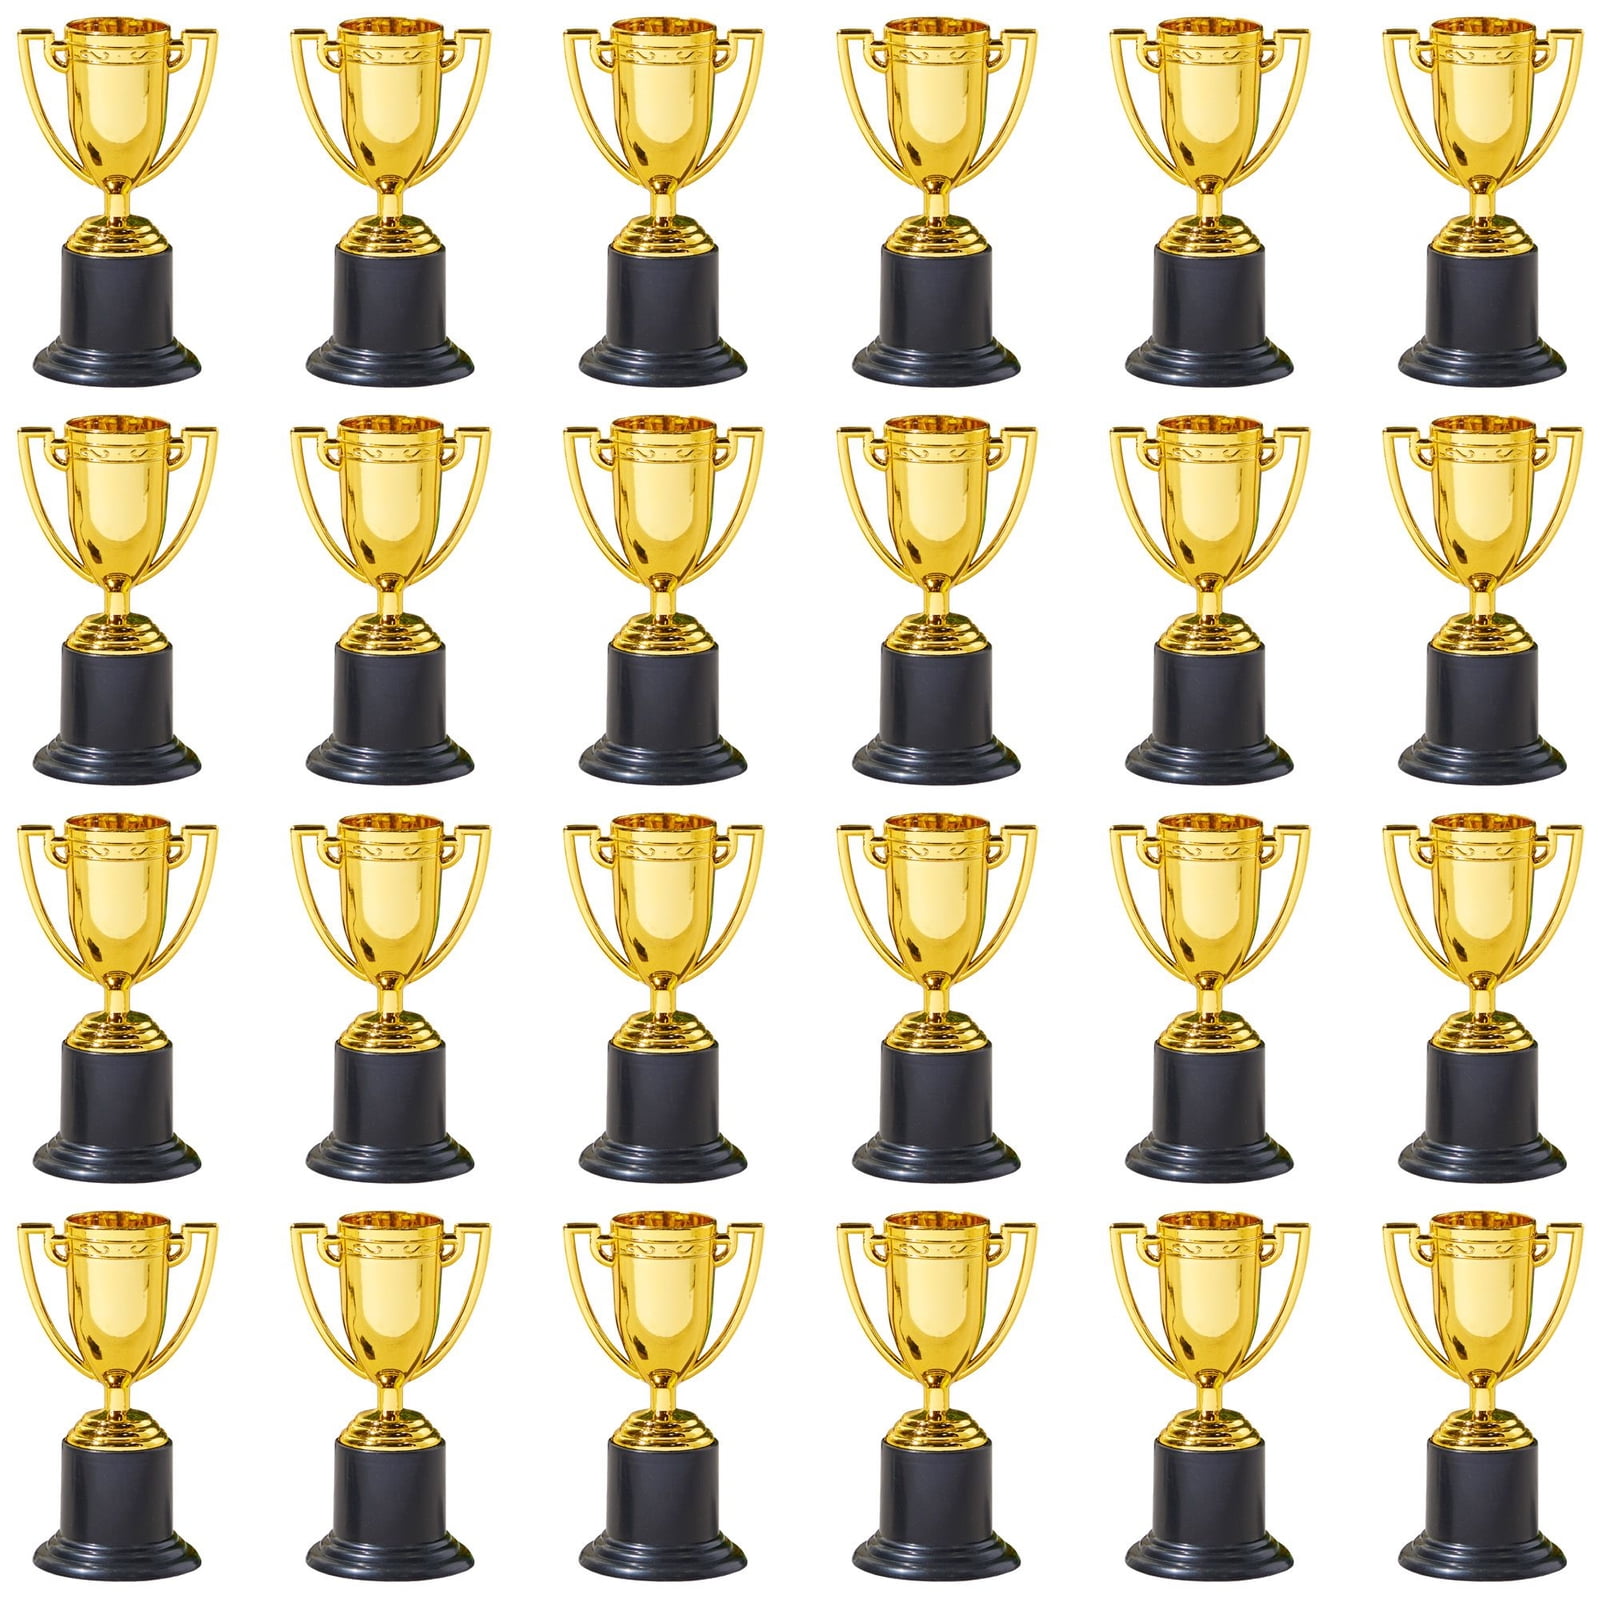 24x Plastic Gold Award Trophy Cups for Sport Tournament Competitions 1.9x4x1.9" 